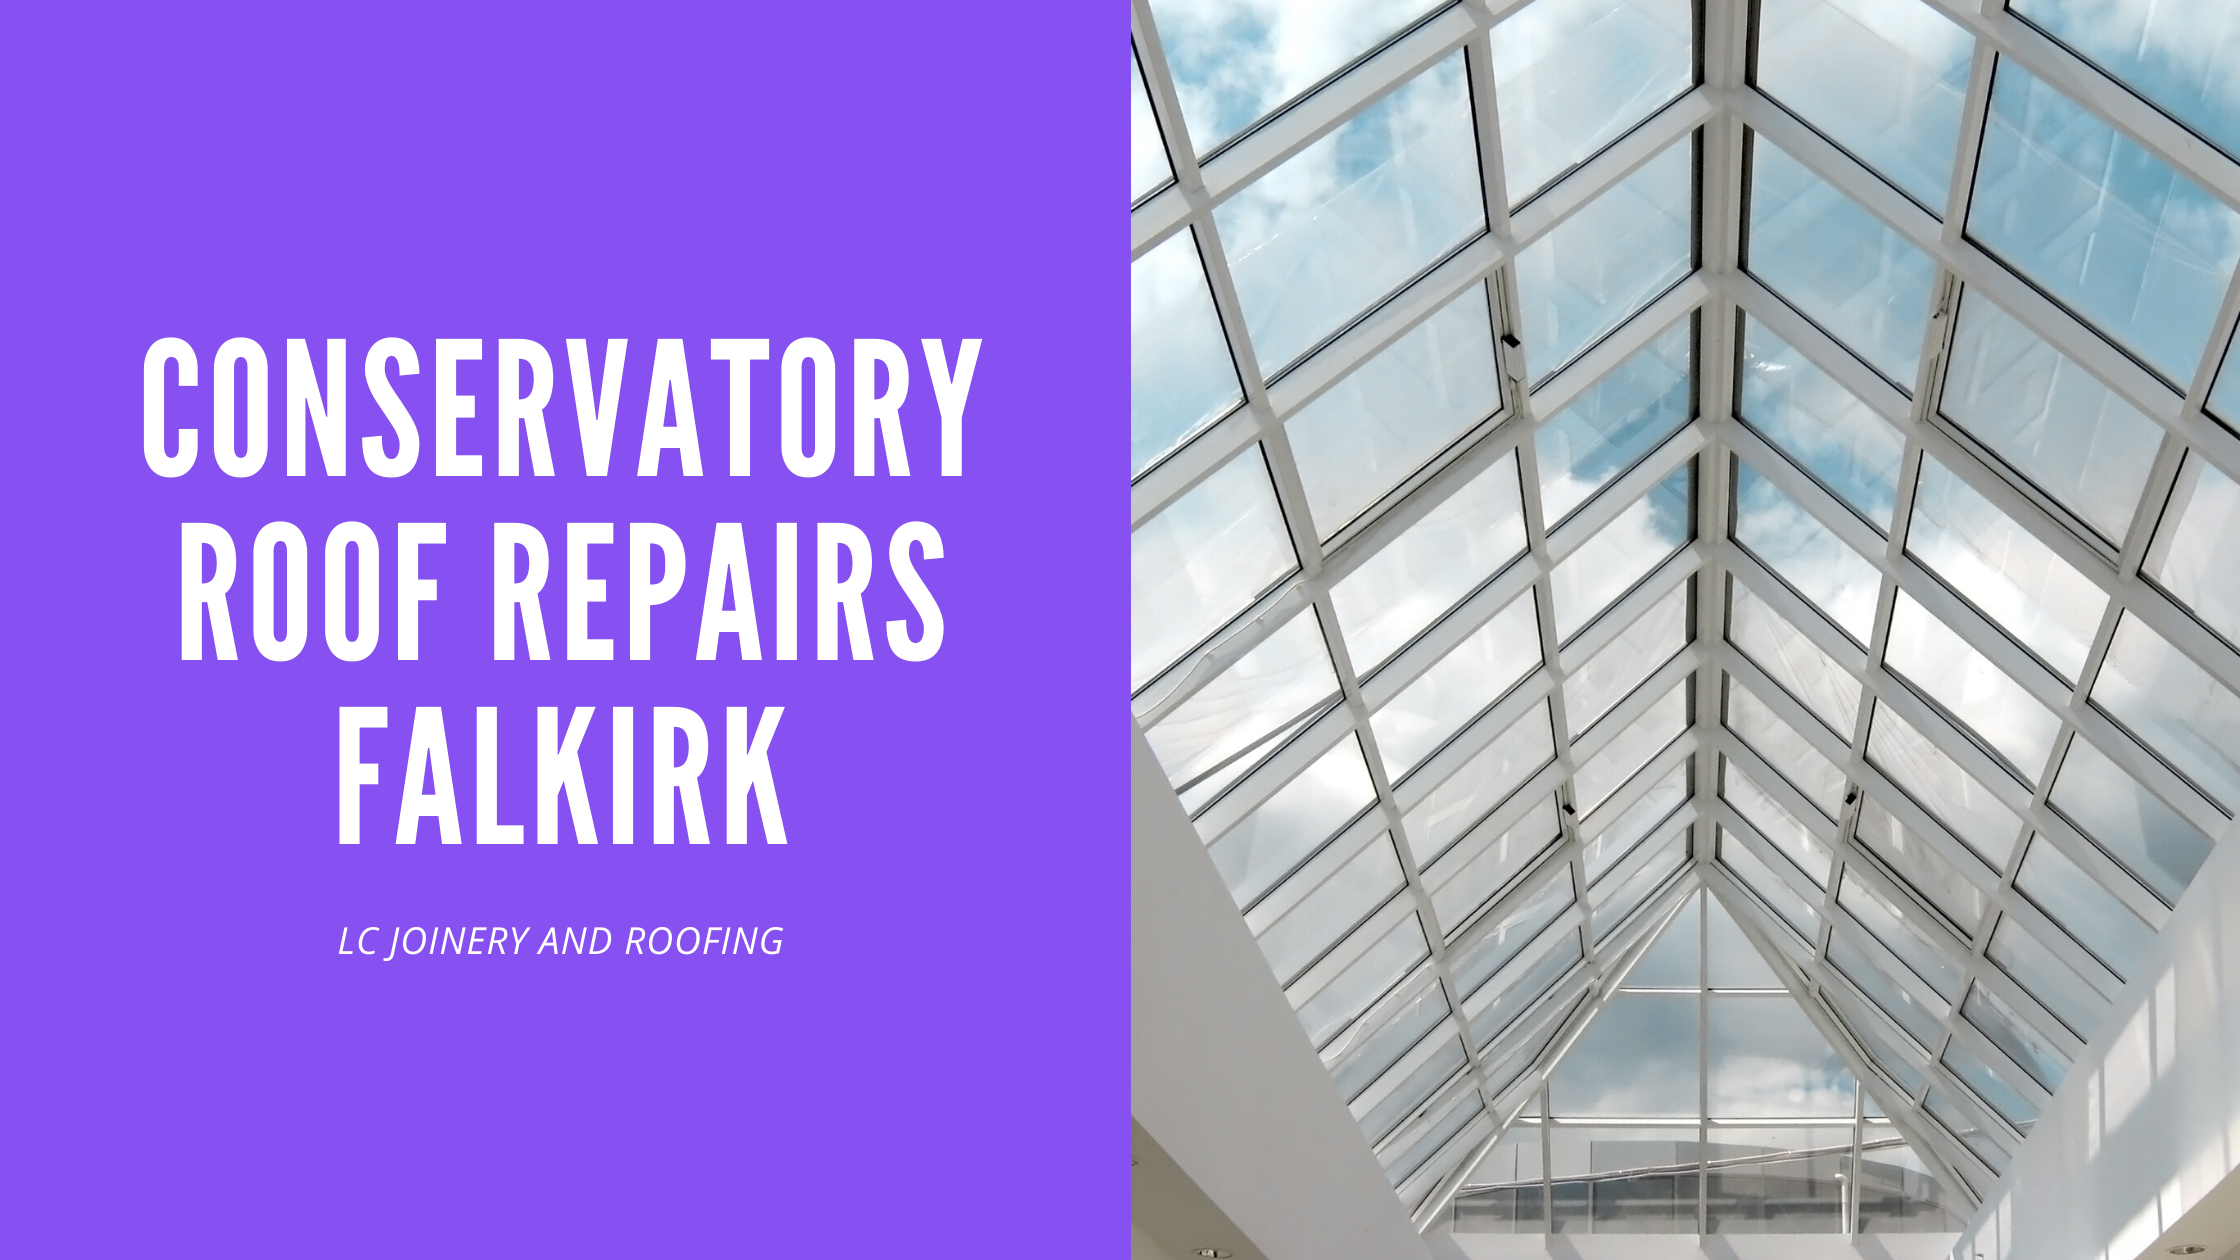 Conservatory Roof Repairs Falkirk